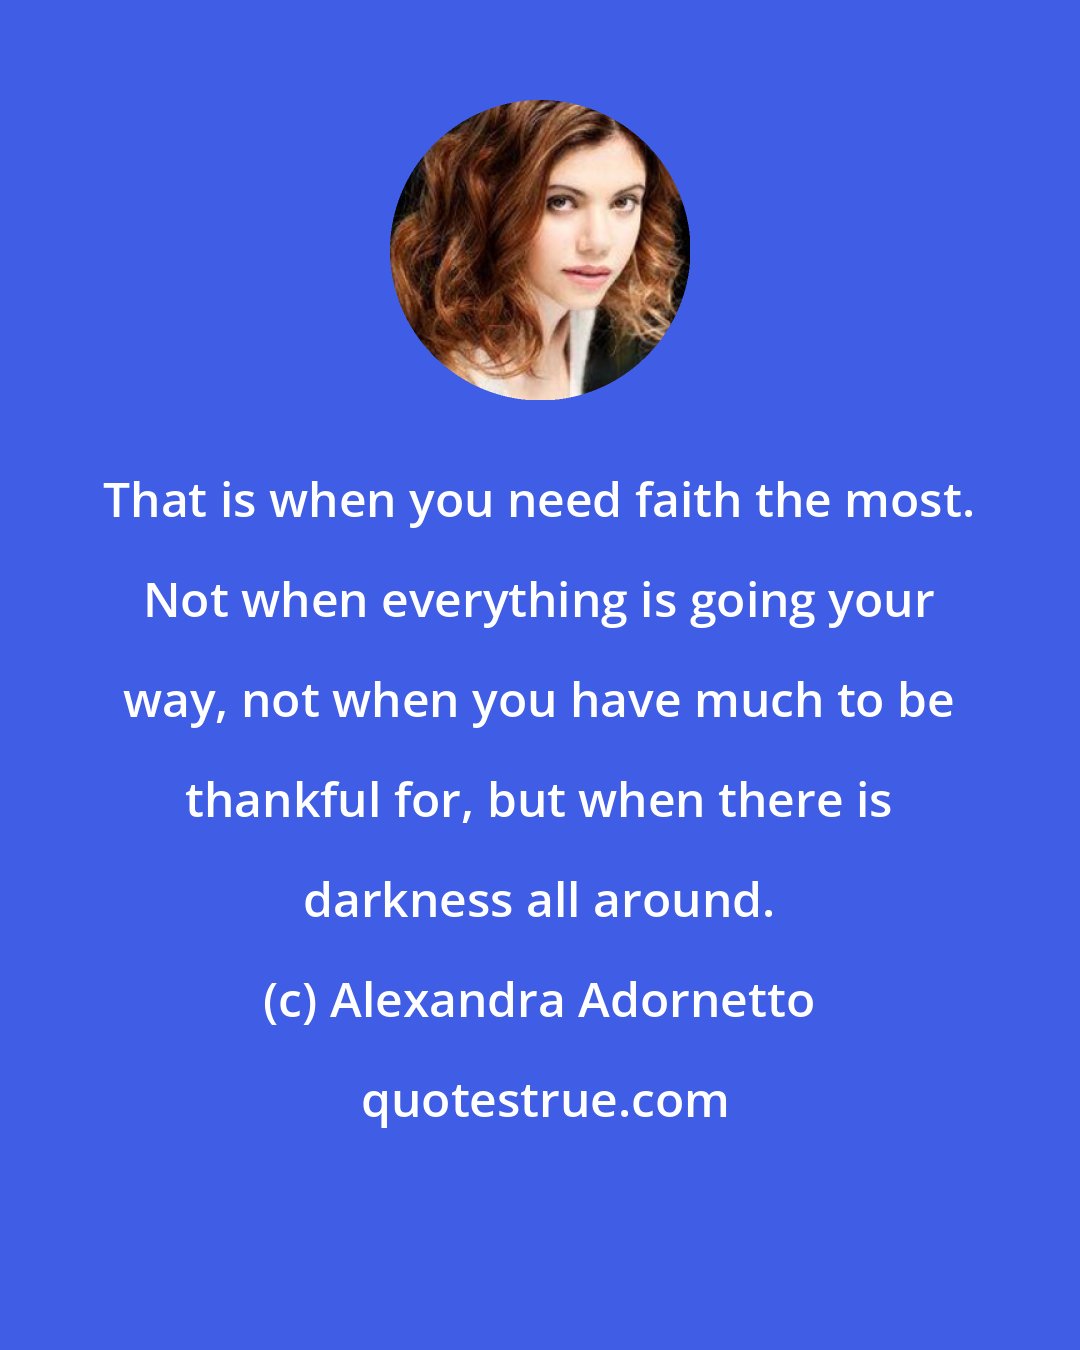 Alexandra Adornetto: That is when you need faith the most. Not when everything is going your way, not when you have much to be thankful for, but when there is darkness all around.